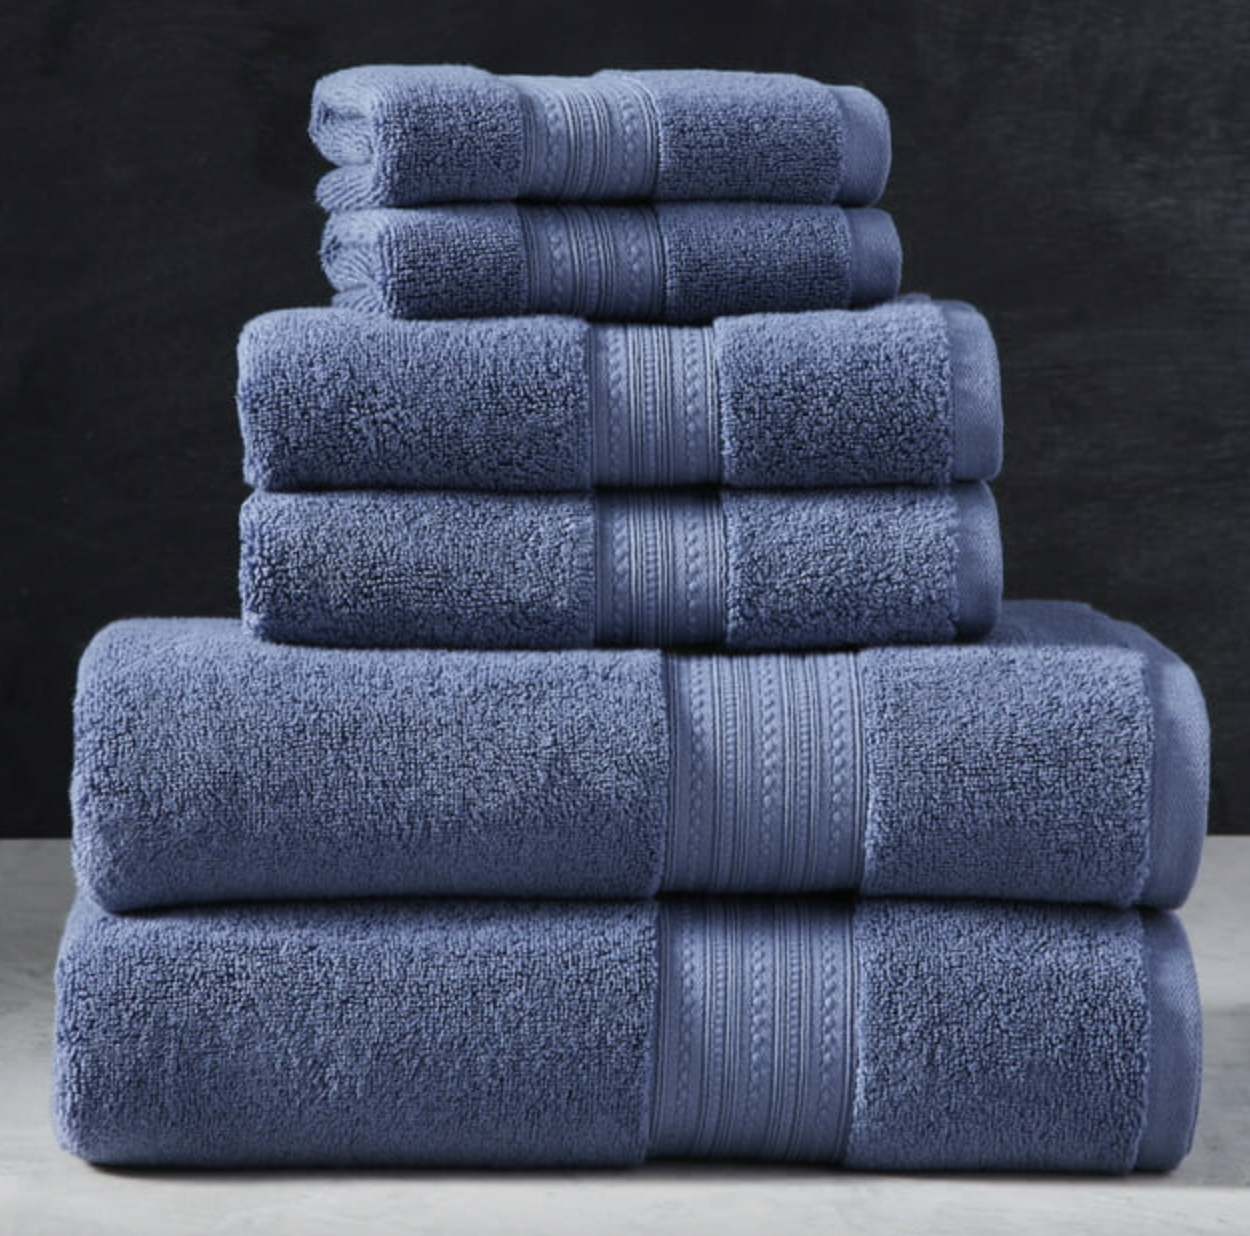 The towels in blue